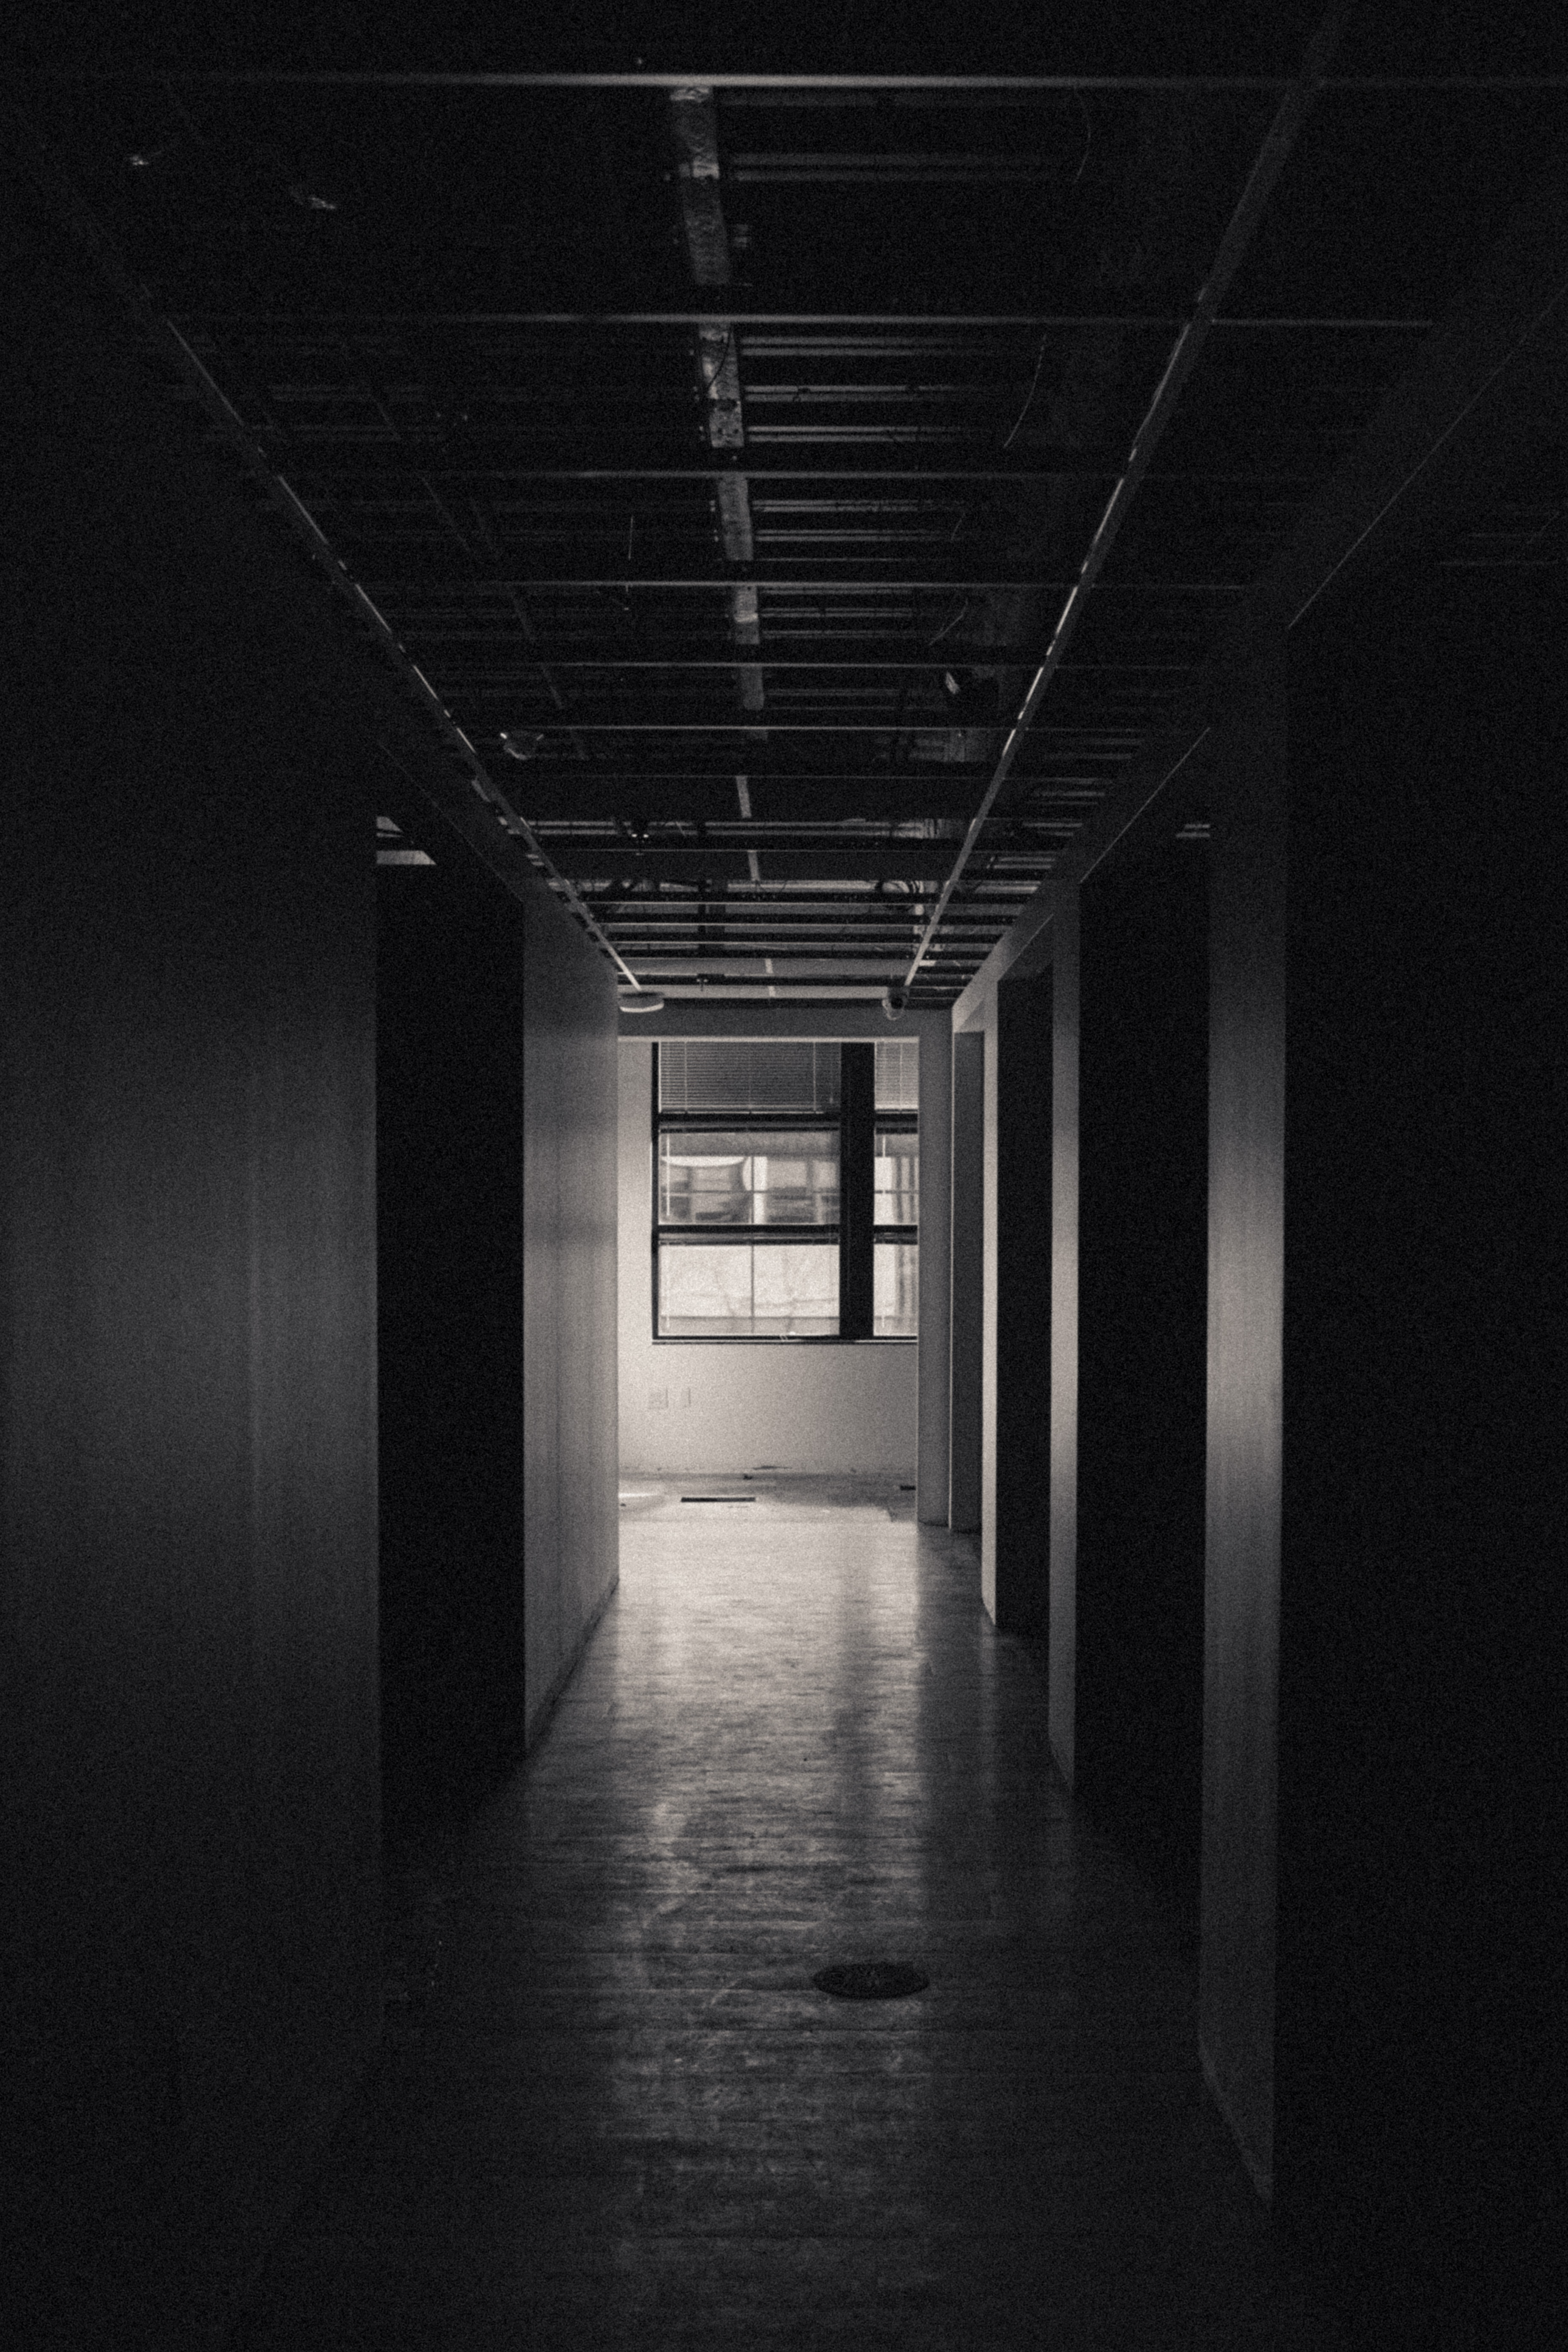 “Black and white photo looking down an office hallway toward a window. There are dark office spaces along the sides of the hallway. Doors, lights, and ceiling tiles have not been installed yet.”